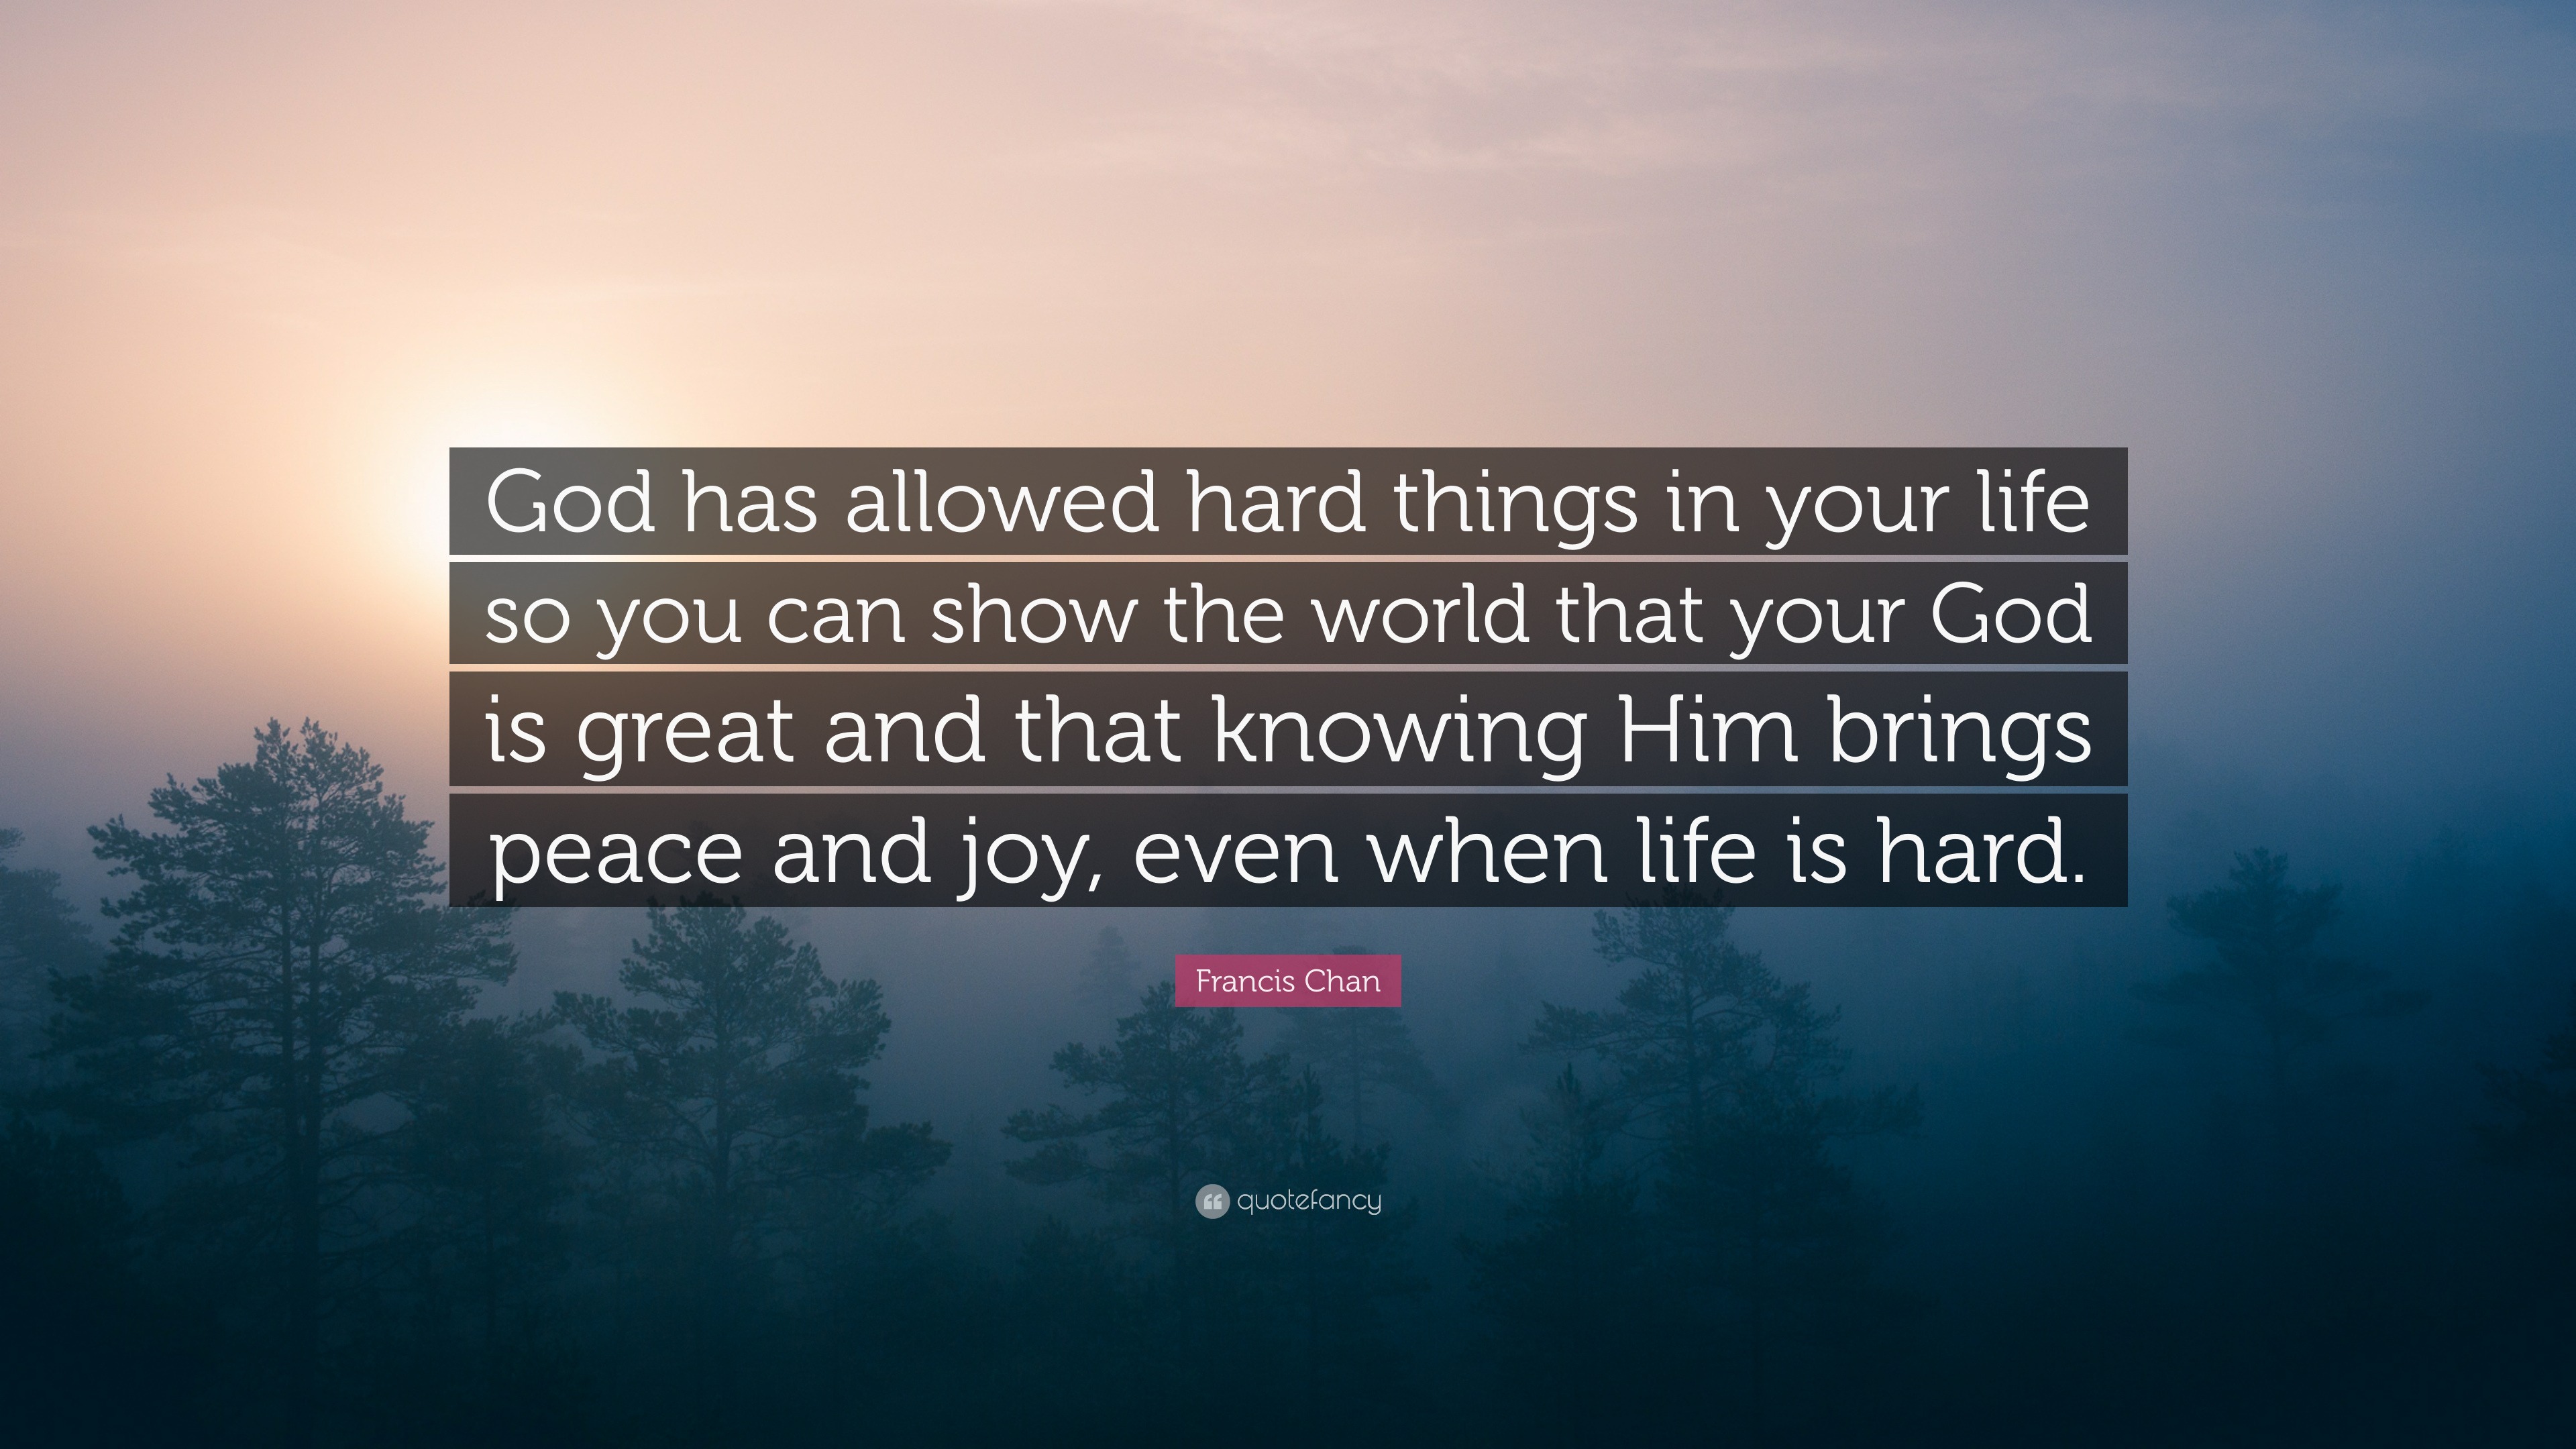 life is hard quote francis chan quote u201cgod has allowed hard things in your life so